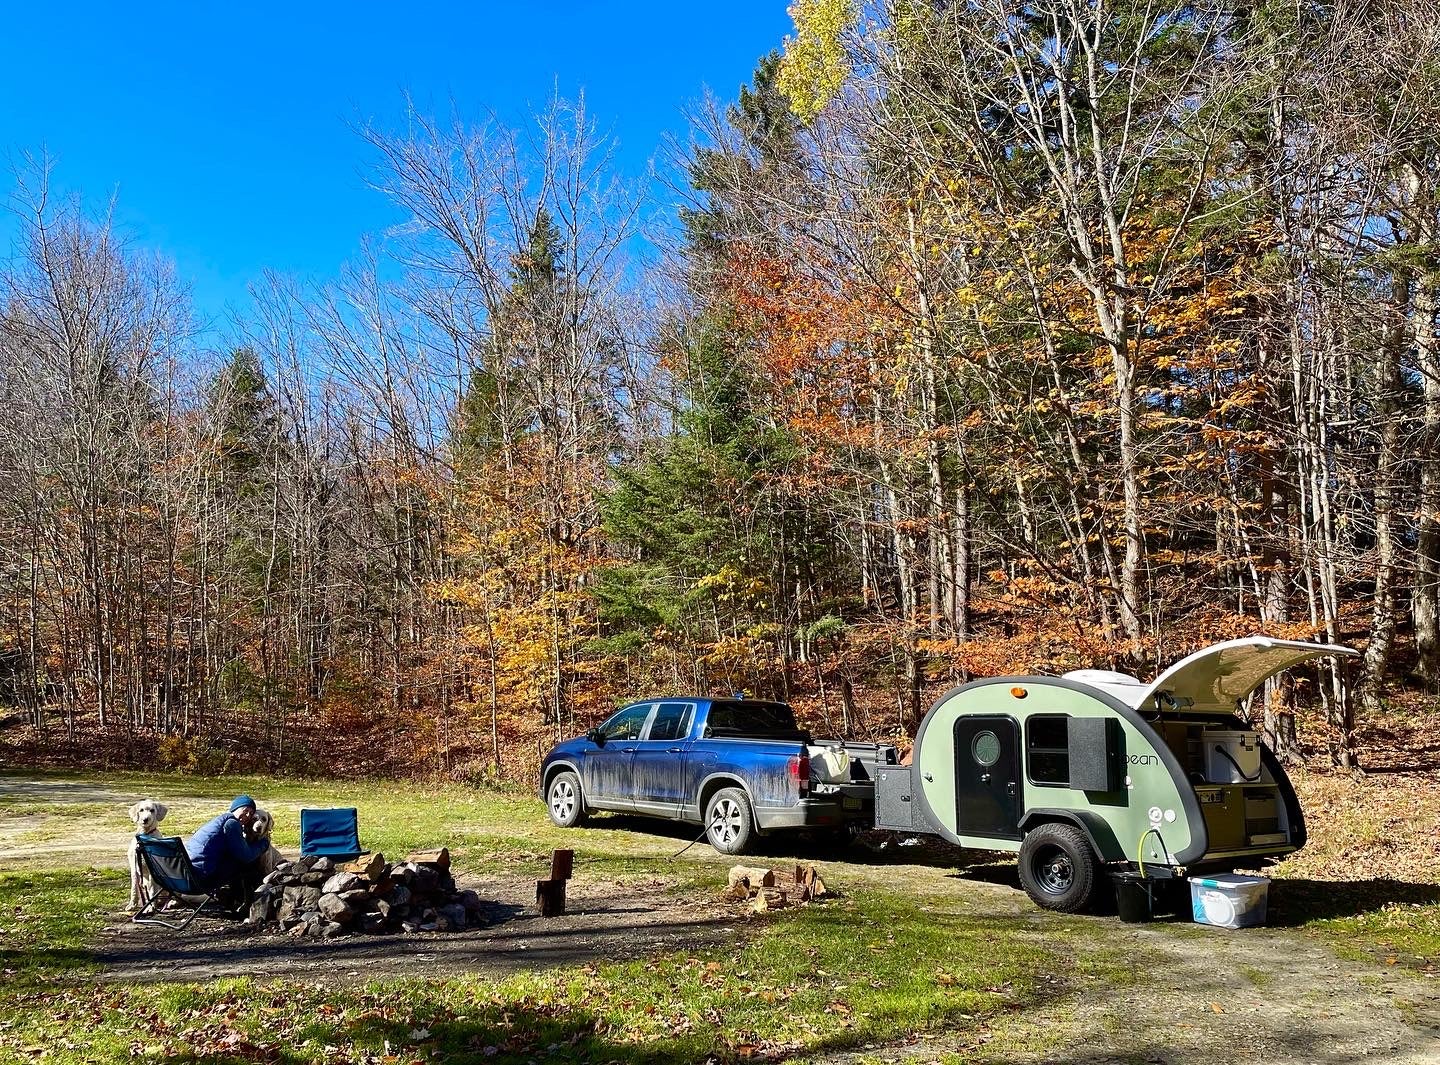 Camper submitted image from Statton Pond Camp on Forest Road 71 - 1